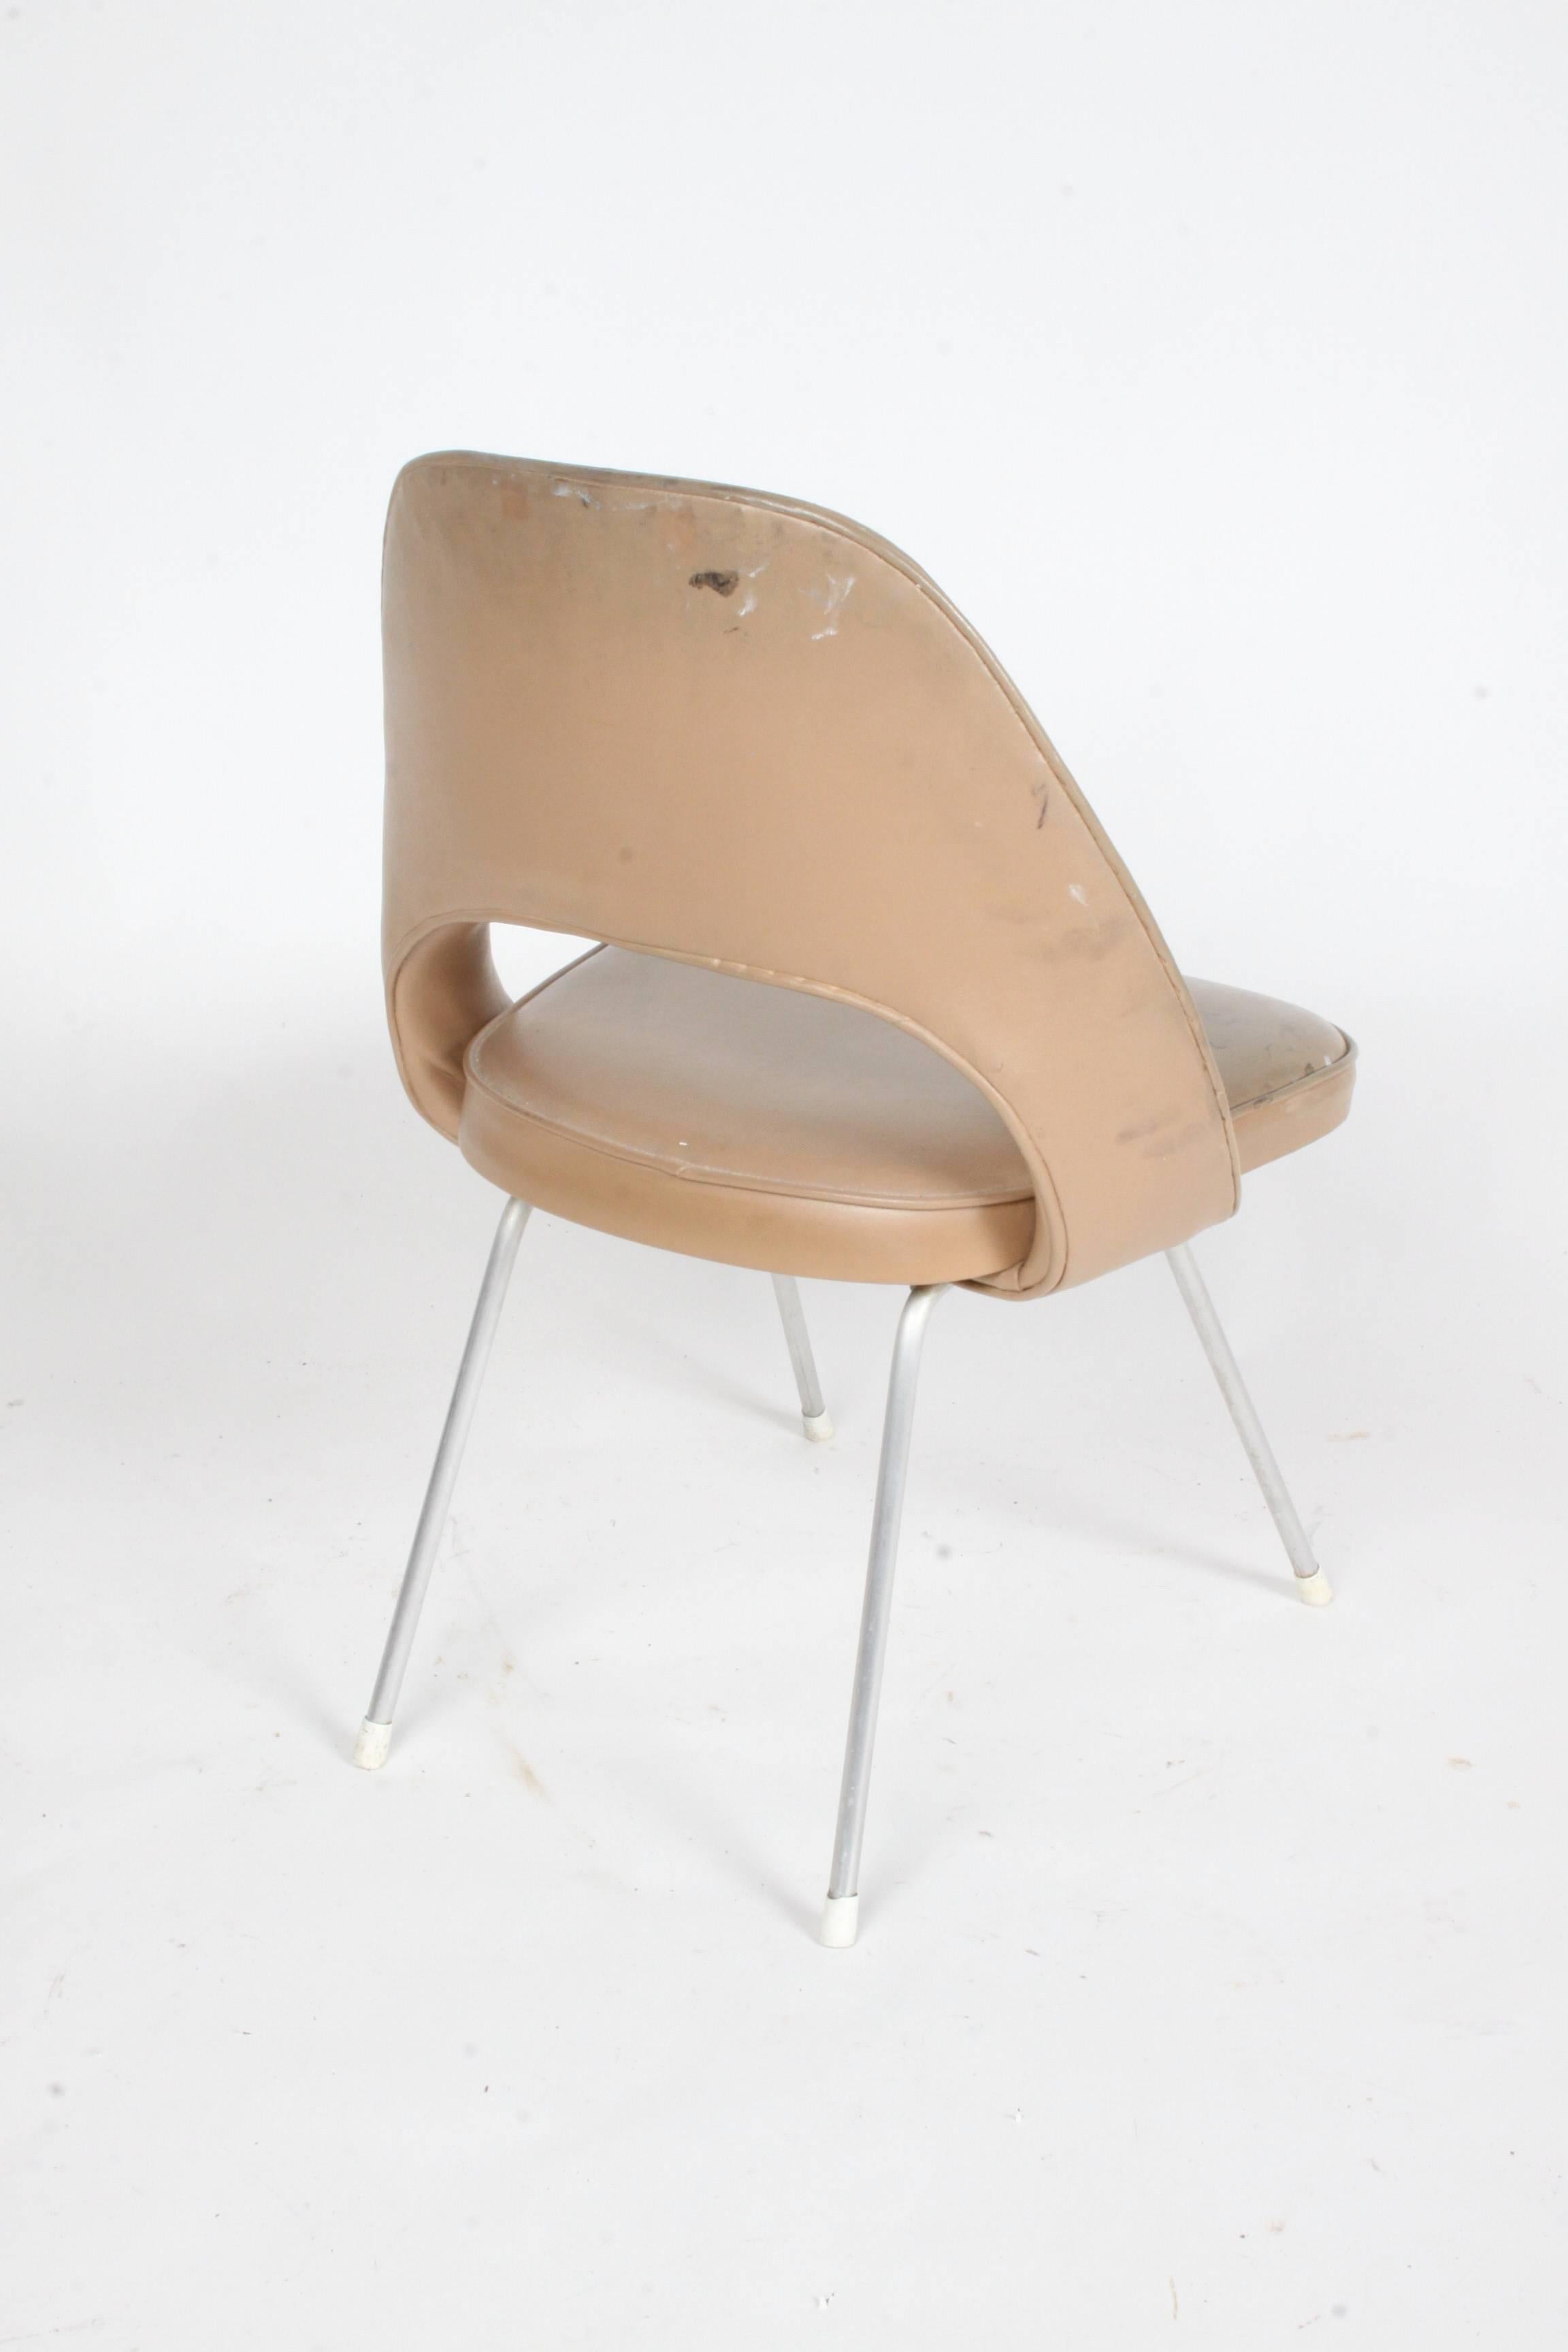 Early Version of Eero Saarinen Side or Desk Chair for Knoll In Good Condition For Sale In St. Louis, MO